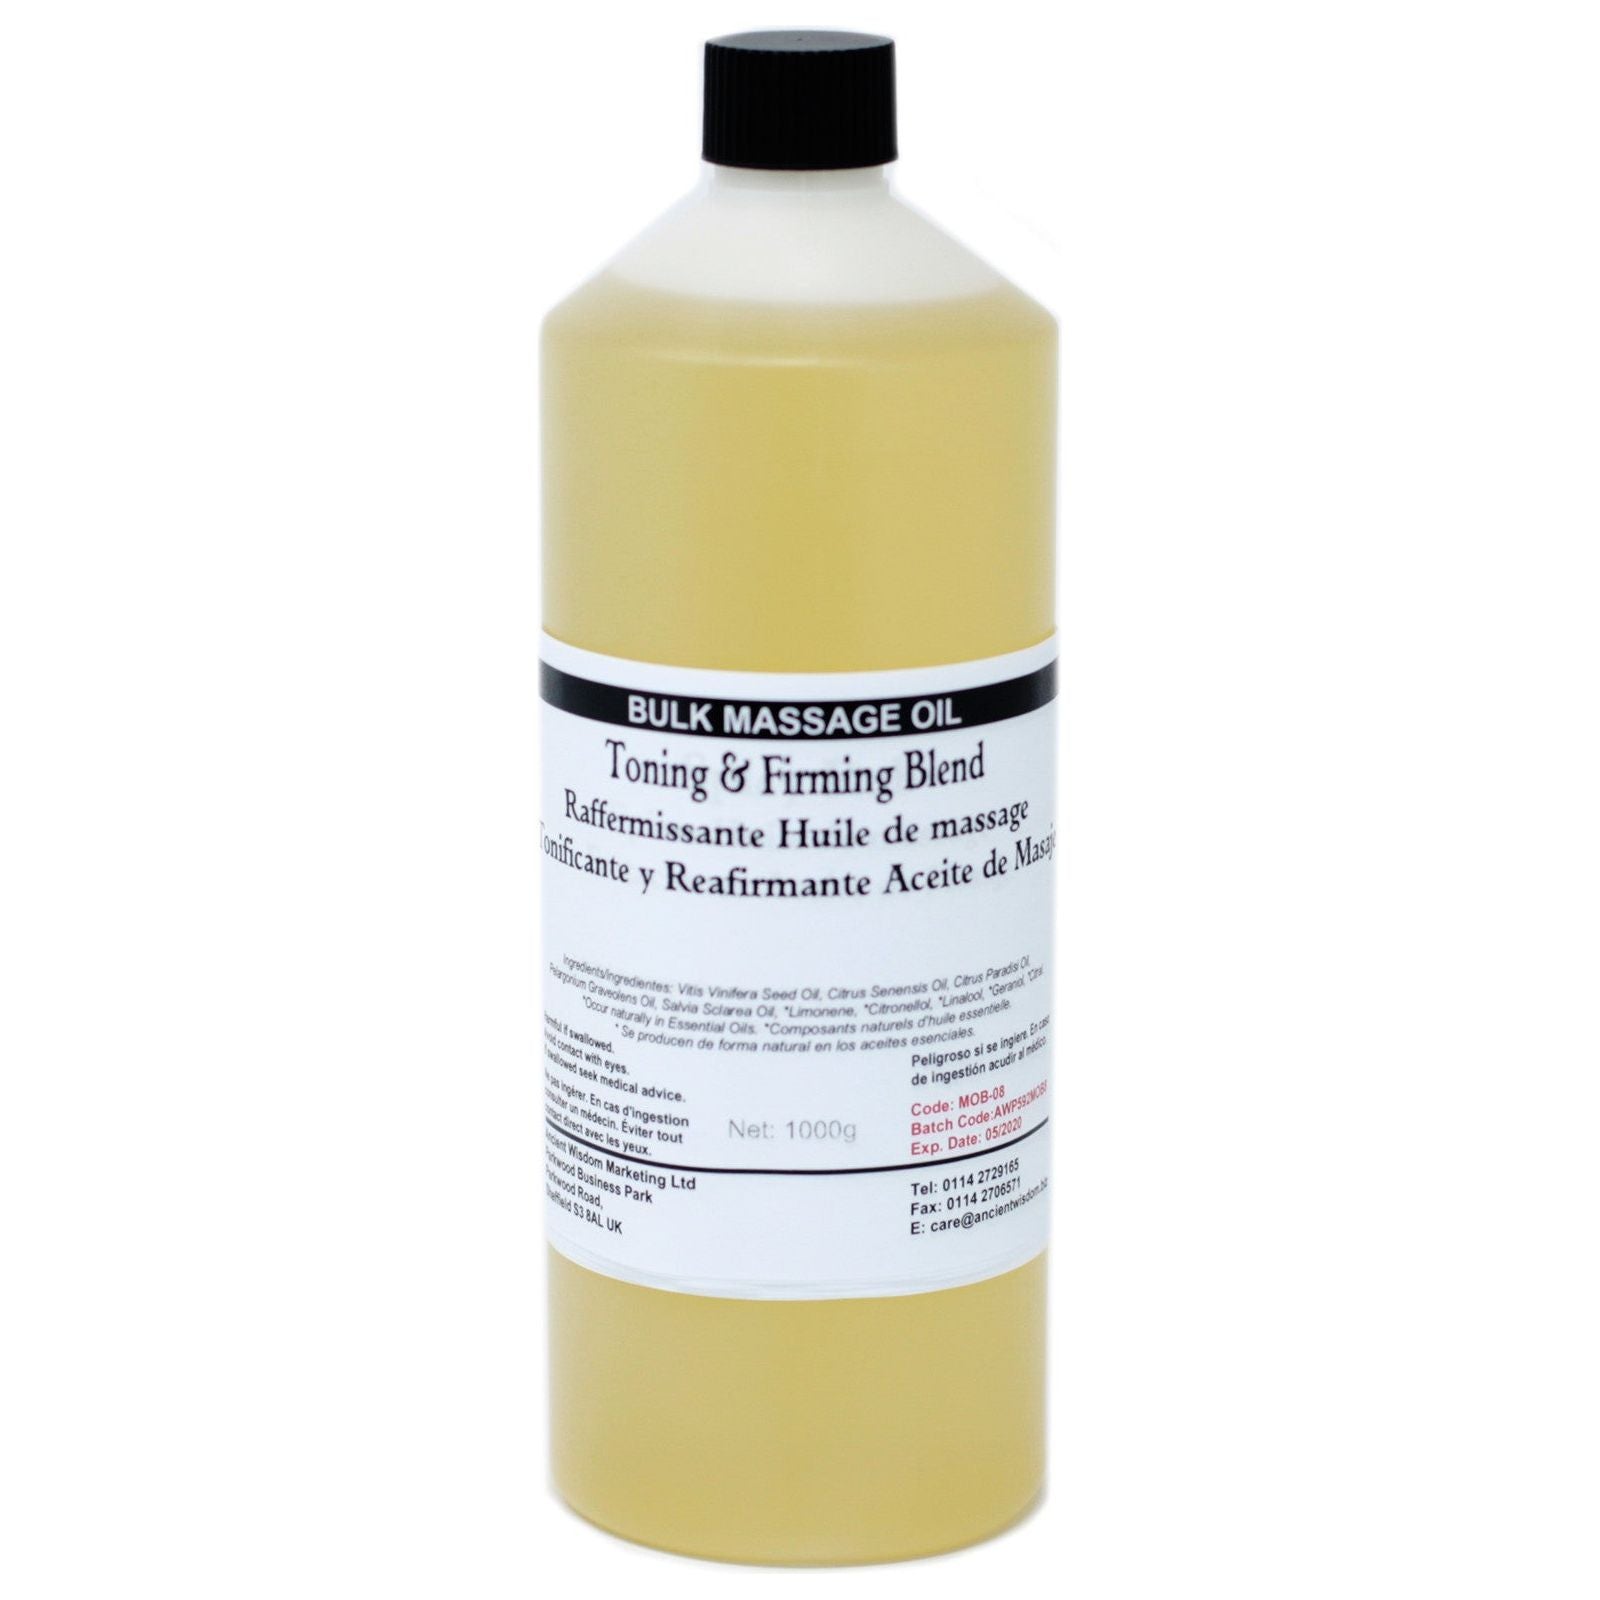 Toning and Firming 1Kg Massage Oil - Ashton and Finch